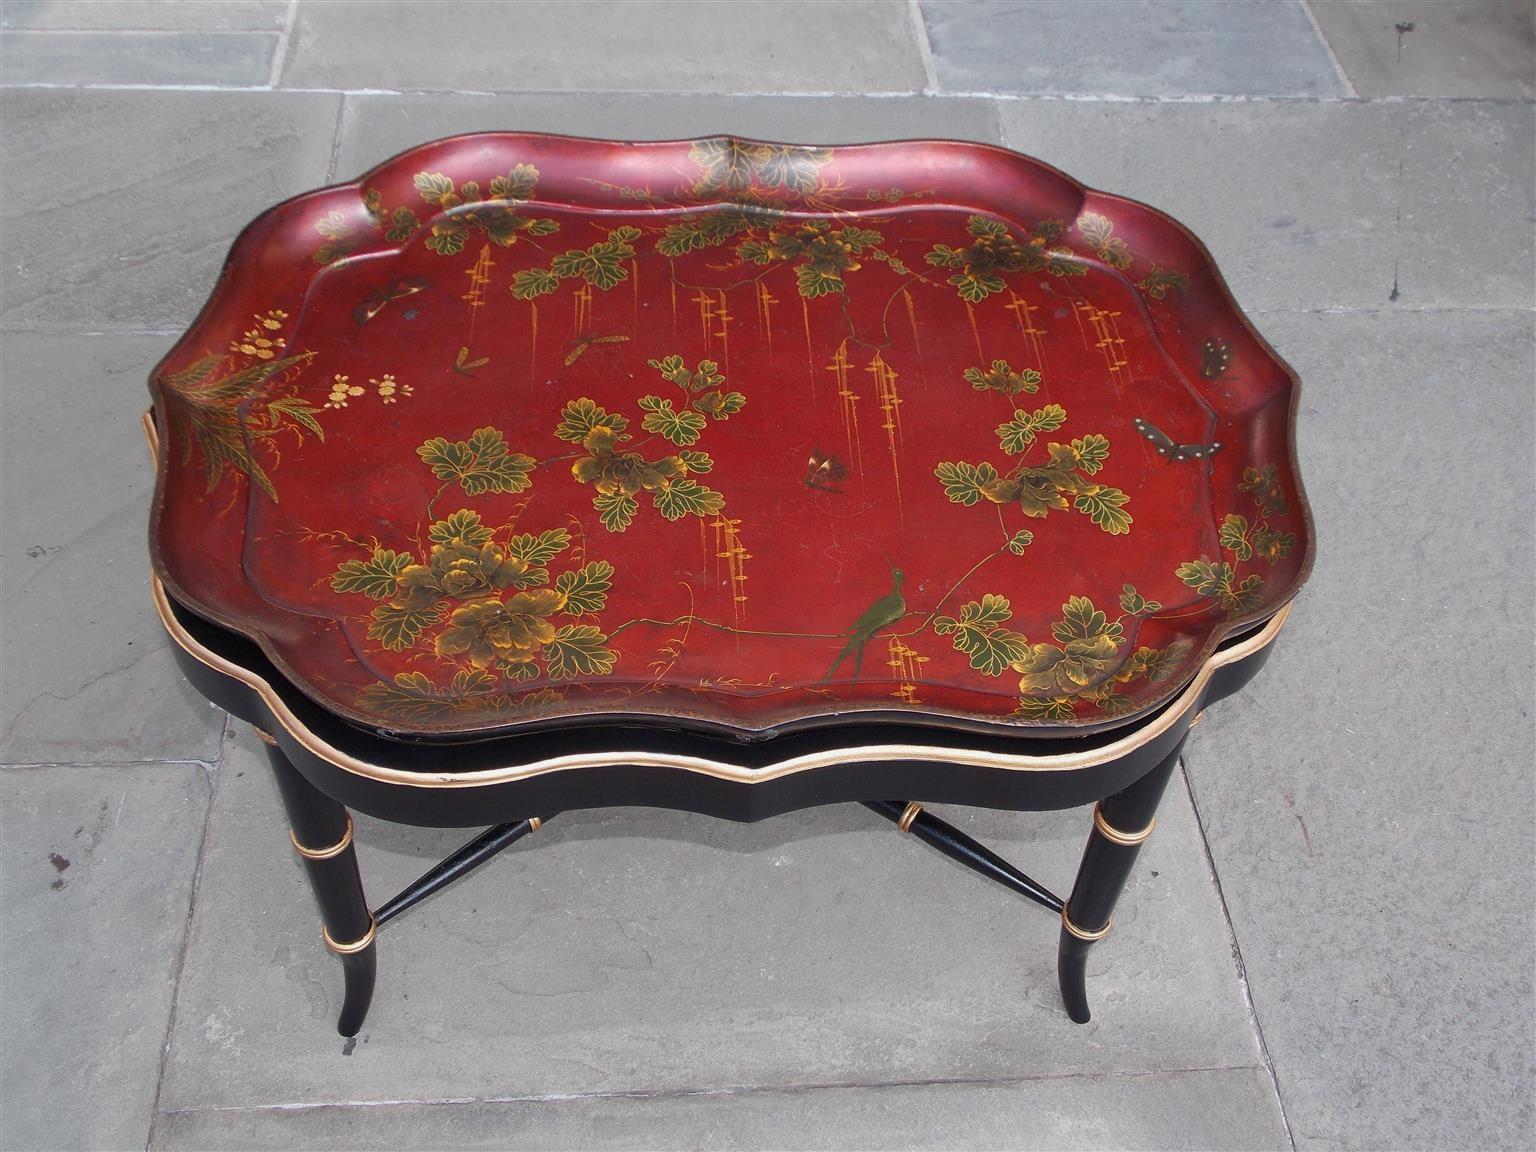 English paper mache red lacquered scalloped tray with decorative bird, butterfly, dragonfly, and foliage motif resting on a faux painted and gilt bamboo stand with splayed legs and the original connecting stretchers, Early 19th century.